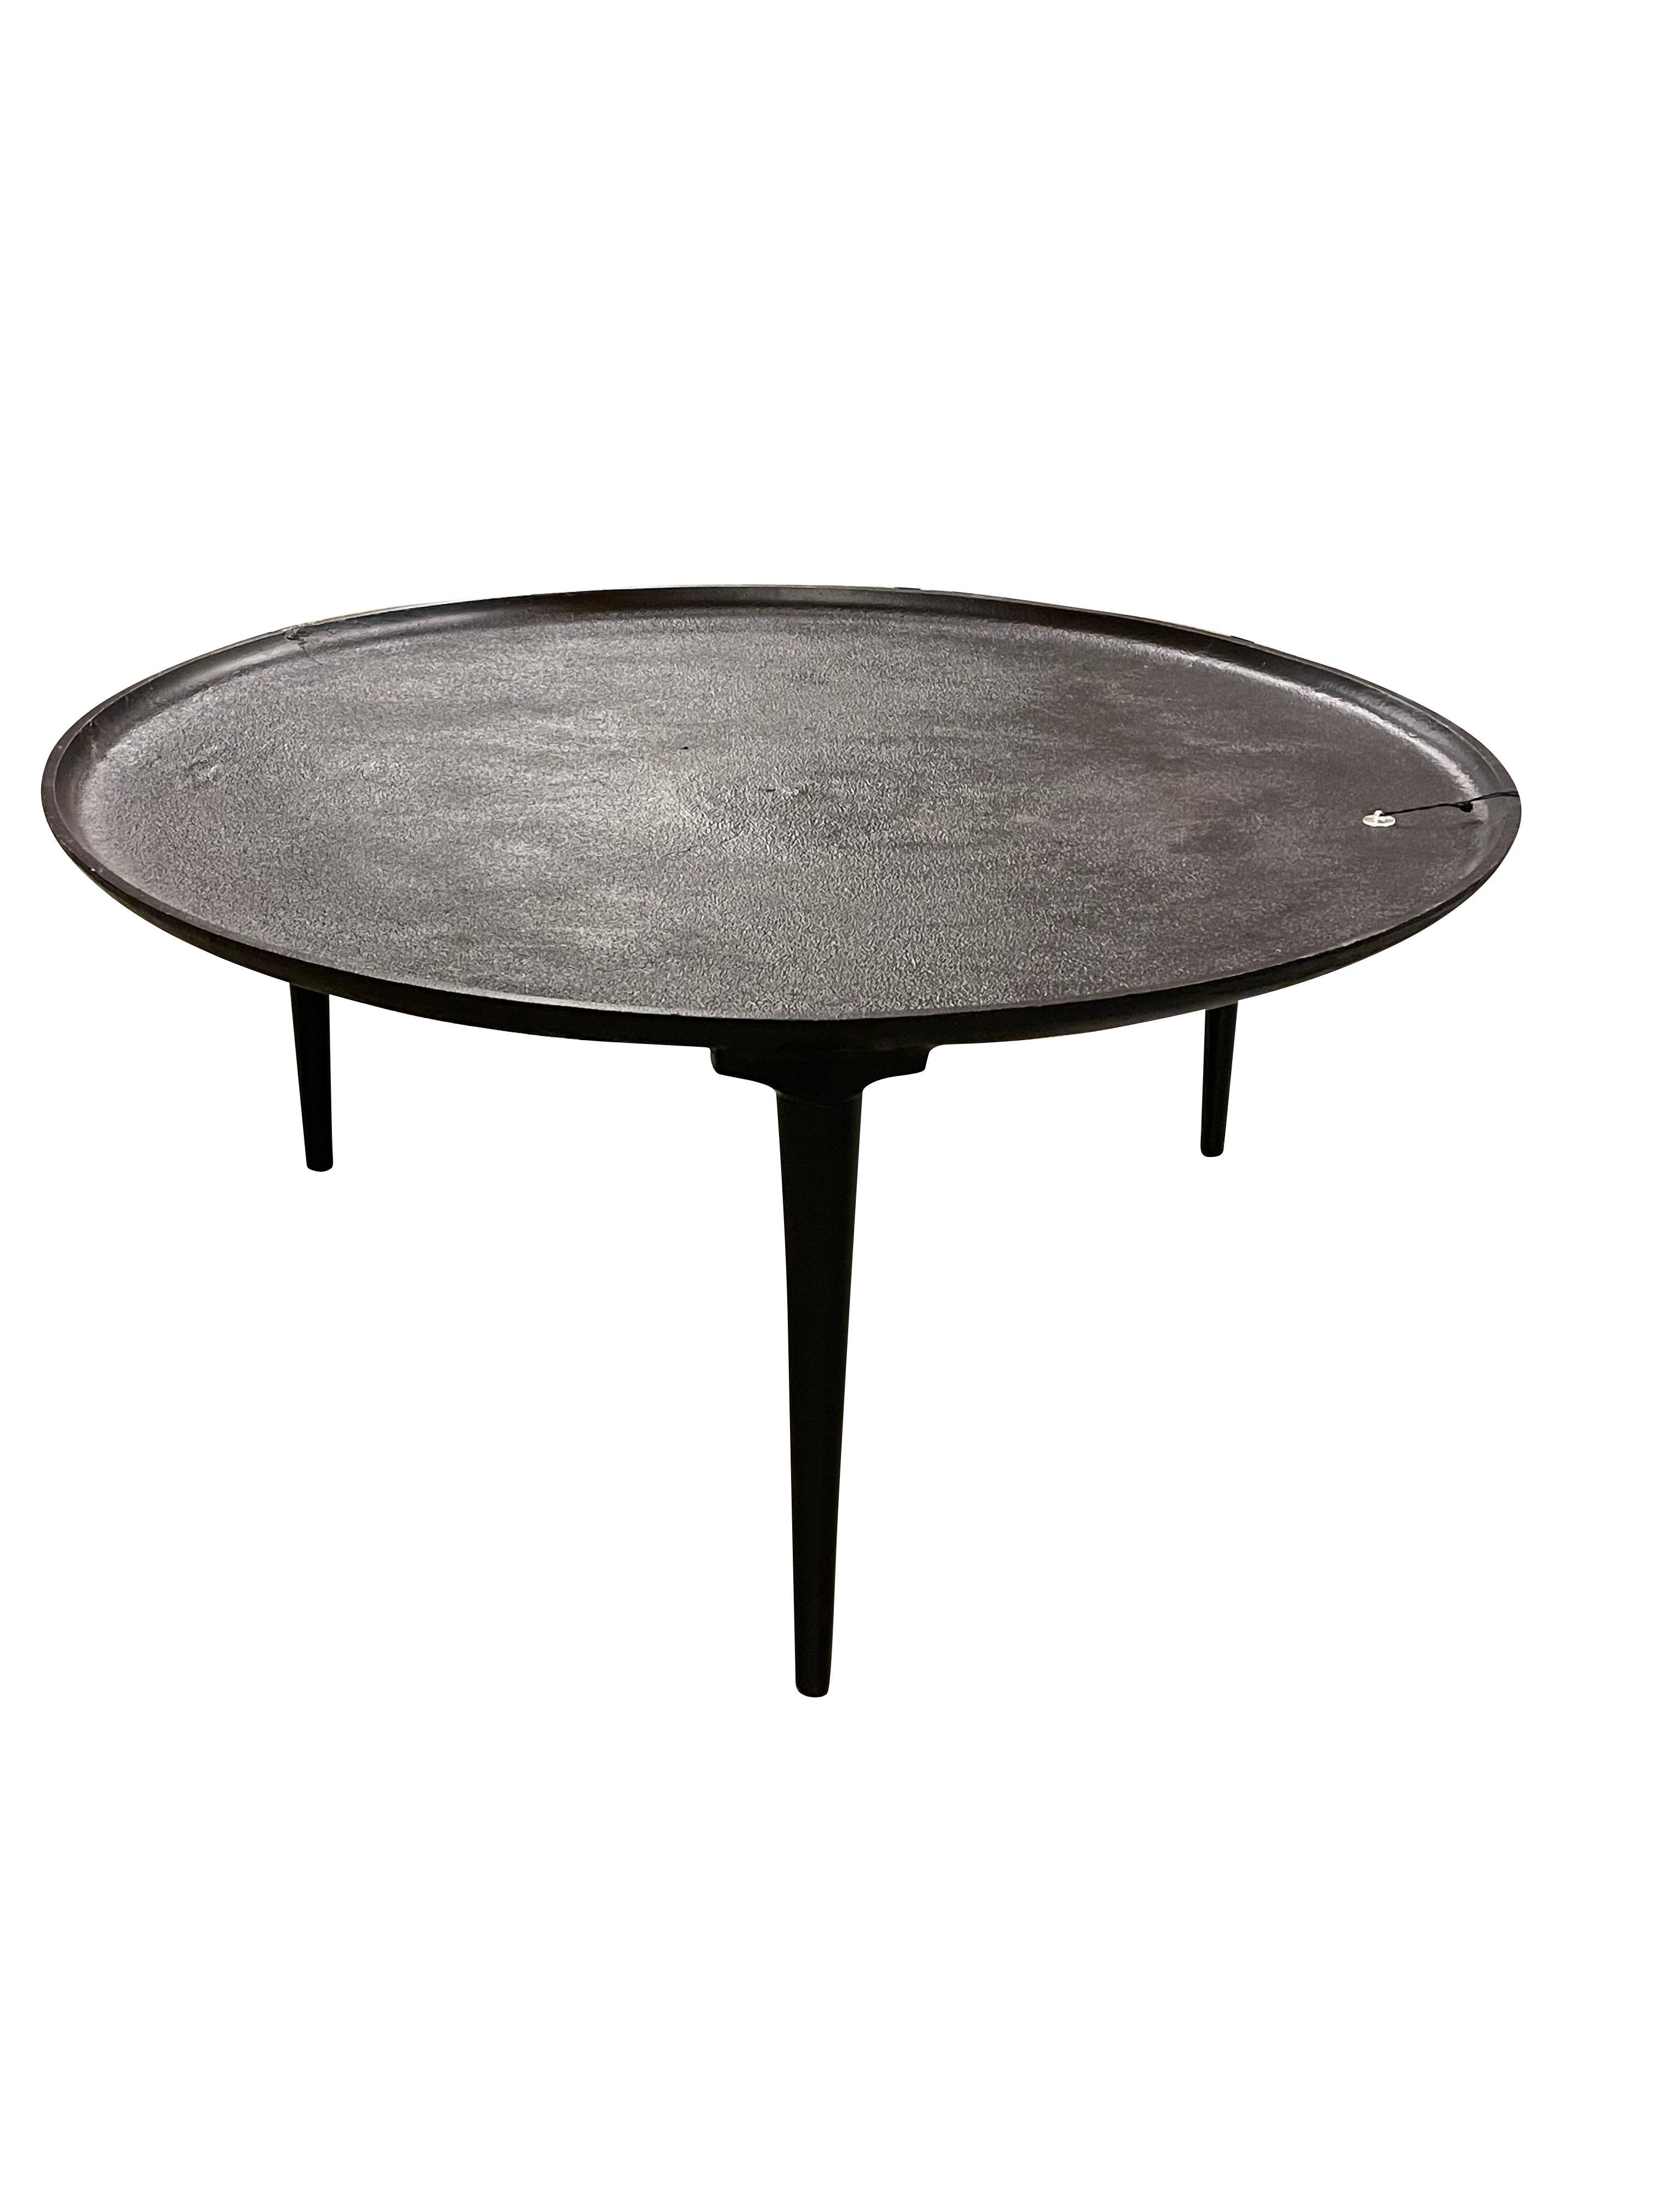 Contemporary Indian black iron round coffee table.
Three tapered legs with T shape designed top.
Slightly textured finish.
Raised lip detail on top border.
Also available as a cocktail table (F2914)
Arriving April.